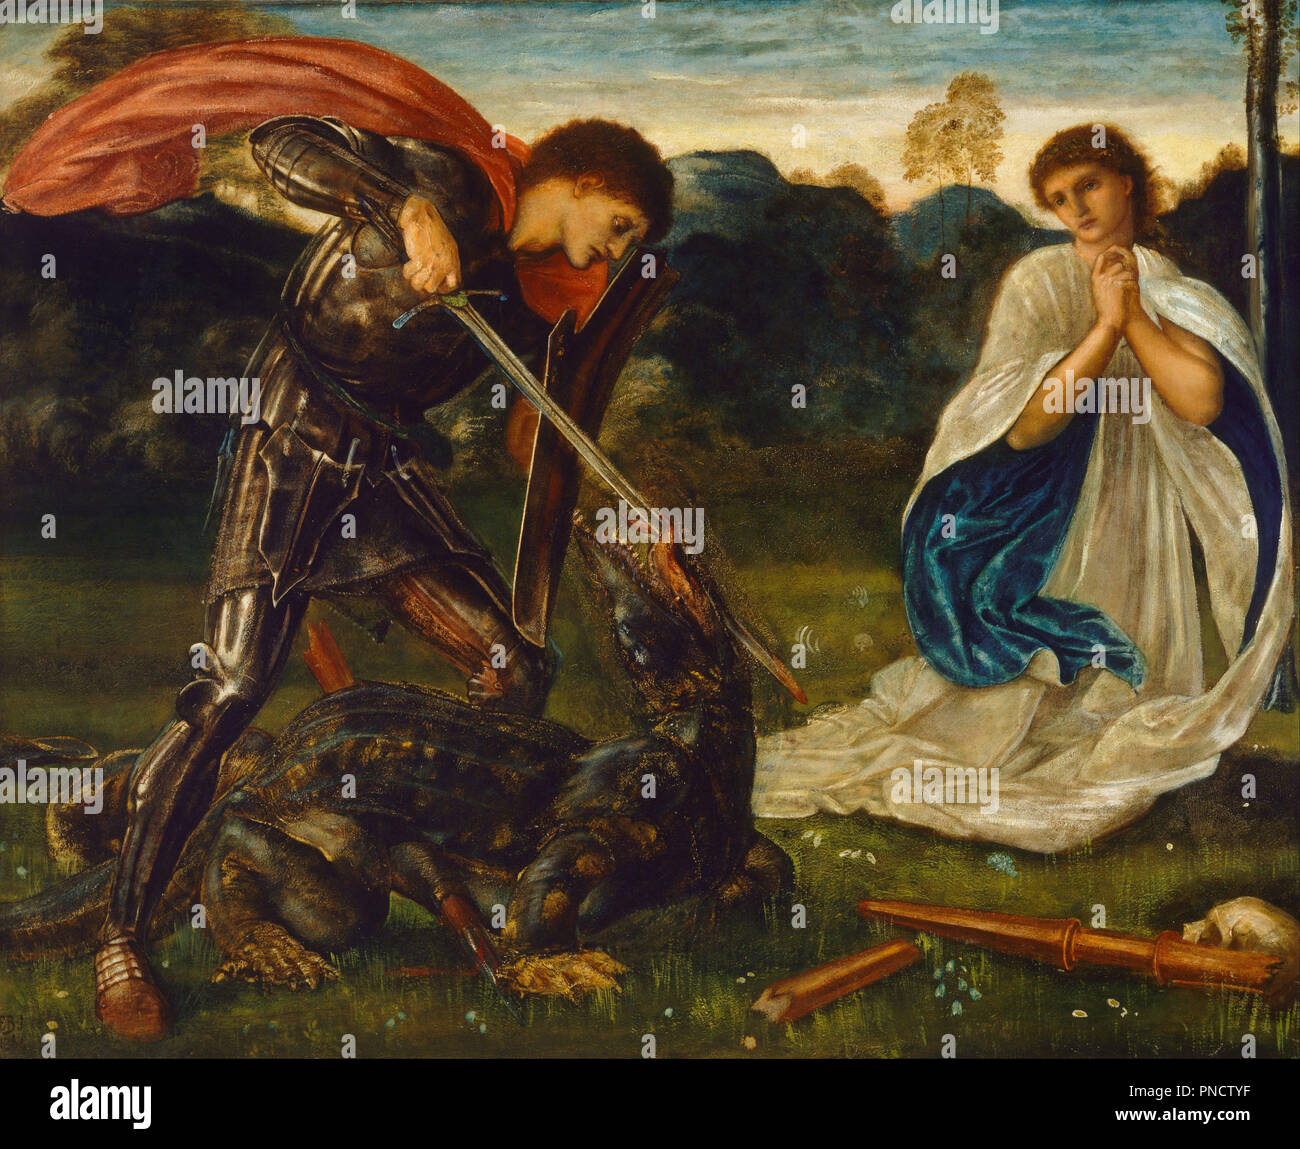 The fight: St George kills the dragon VI. Date/Period: 1866. Painting. Oil on canvas. Height: 105.4 cm (41.4 in); Width: 130.8 cm (51.4 in). Author: Edward Burne-Jones. Burne-Jones, Sir Edward Coley. Stock Photo